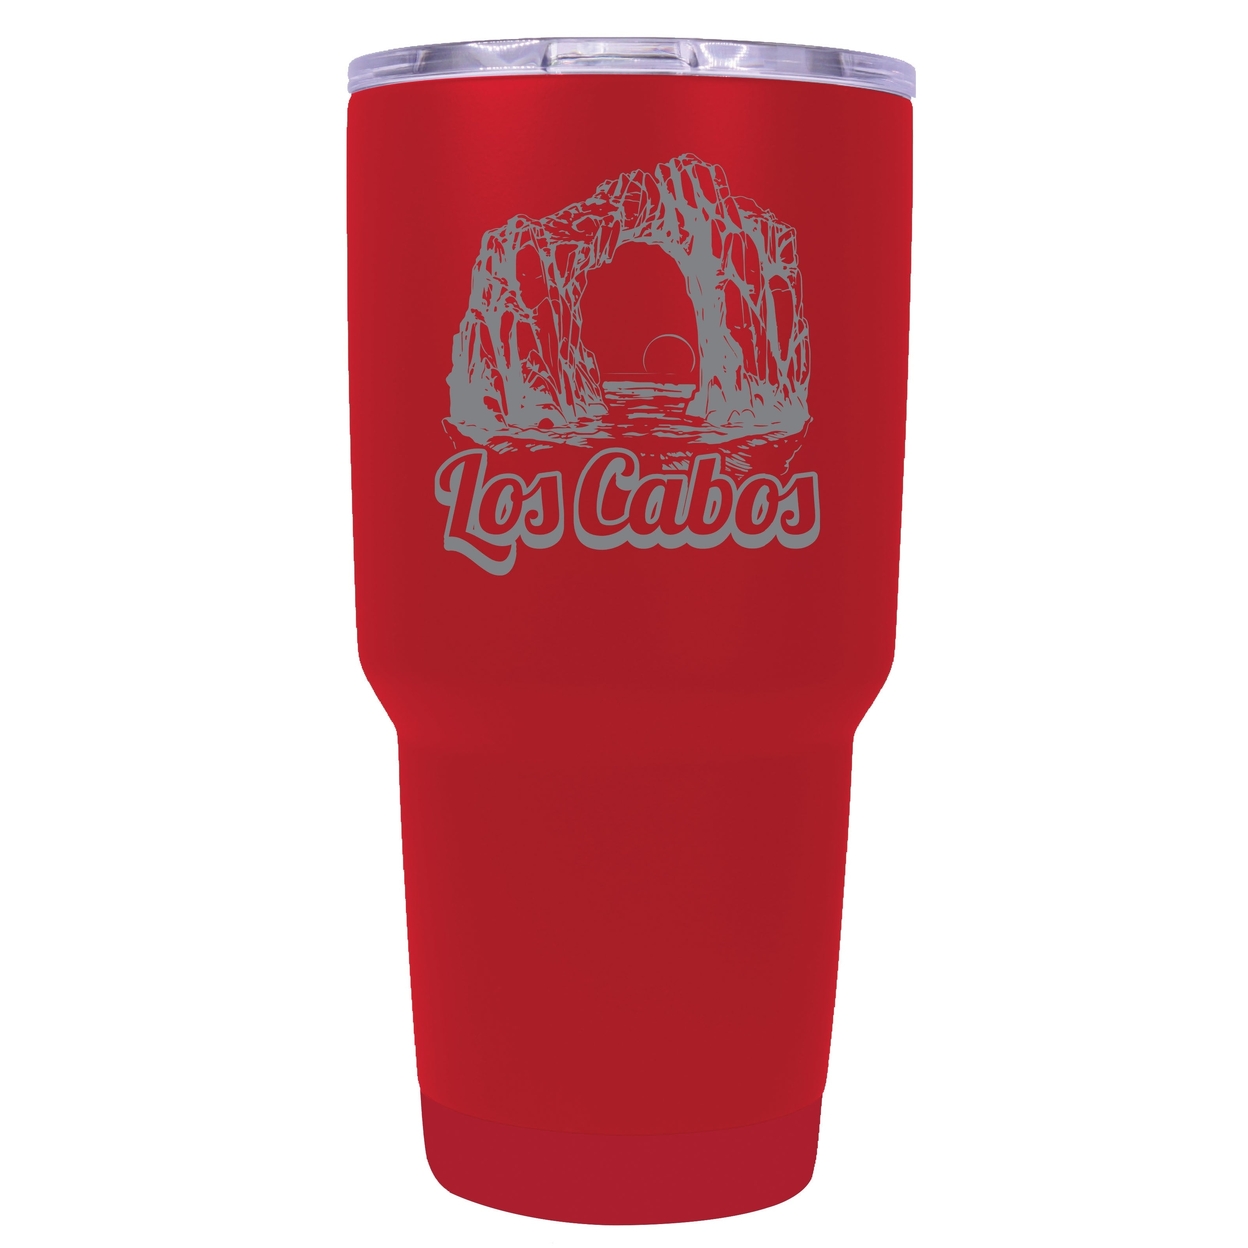 Los Cabos Mexico Souvenir 24 Oz Engraved Insulated Stainless Steel Tumbler - Navy,,Single Unit